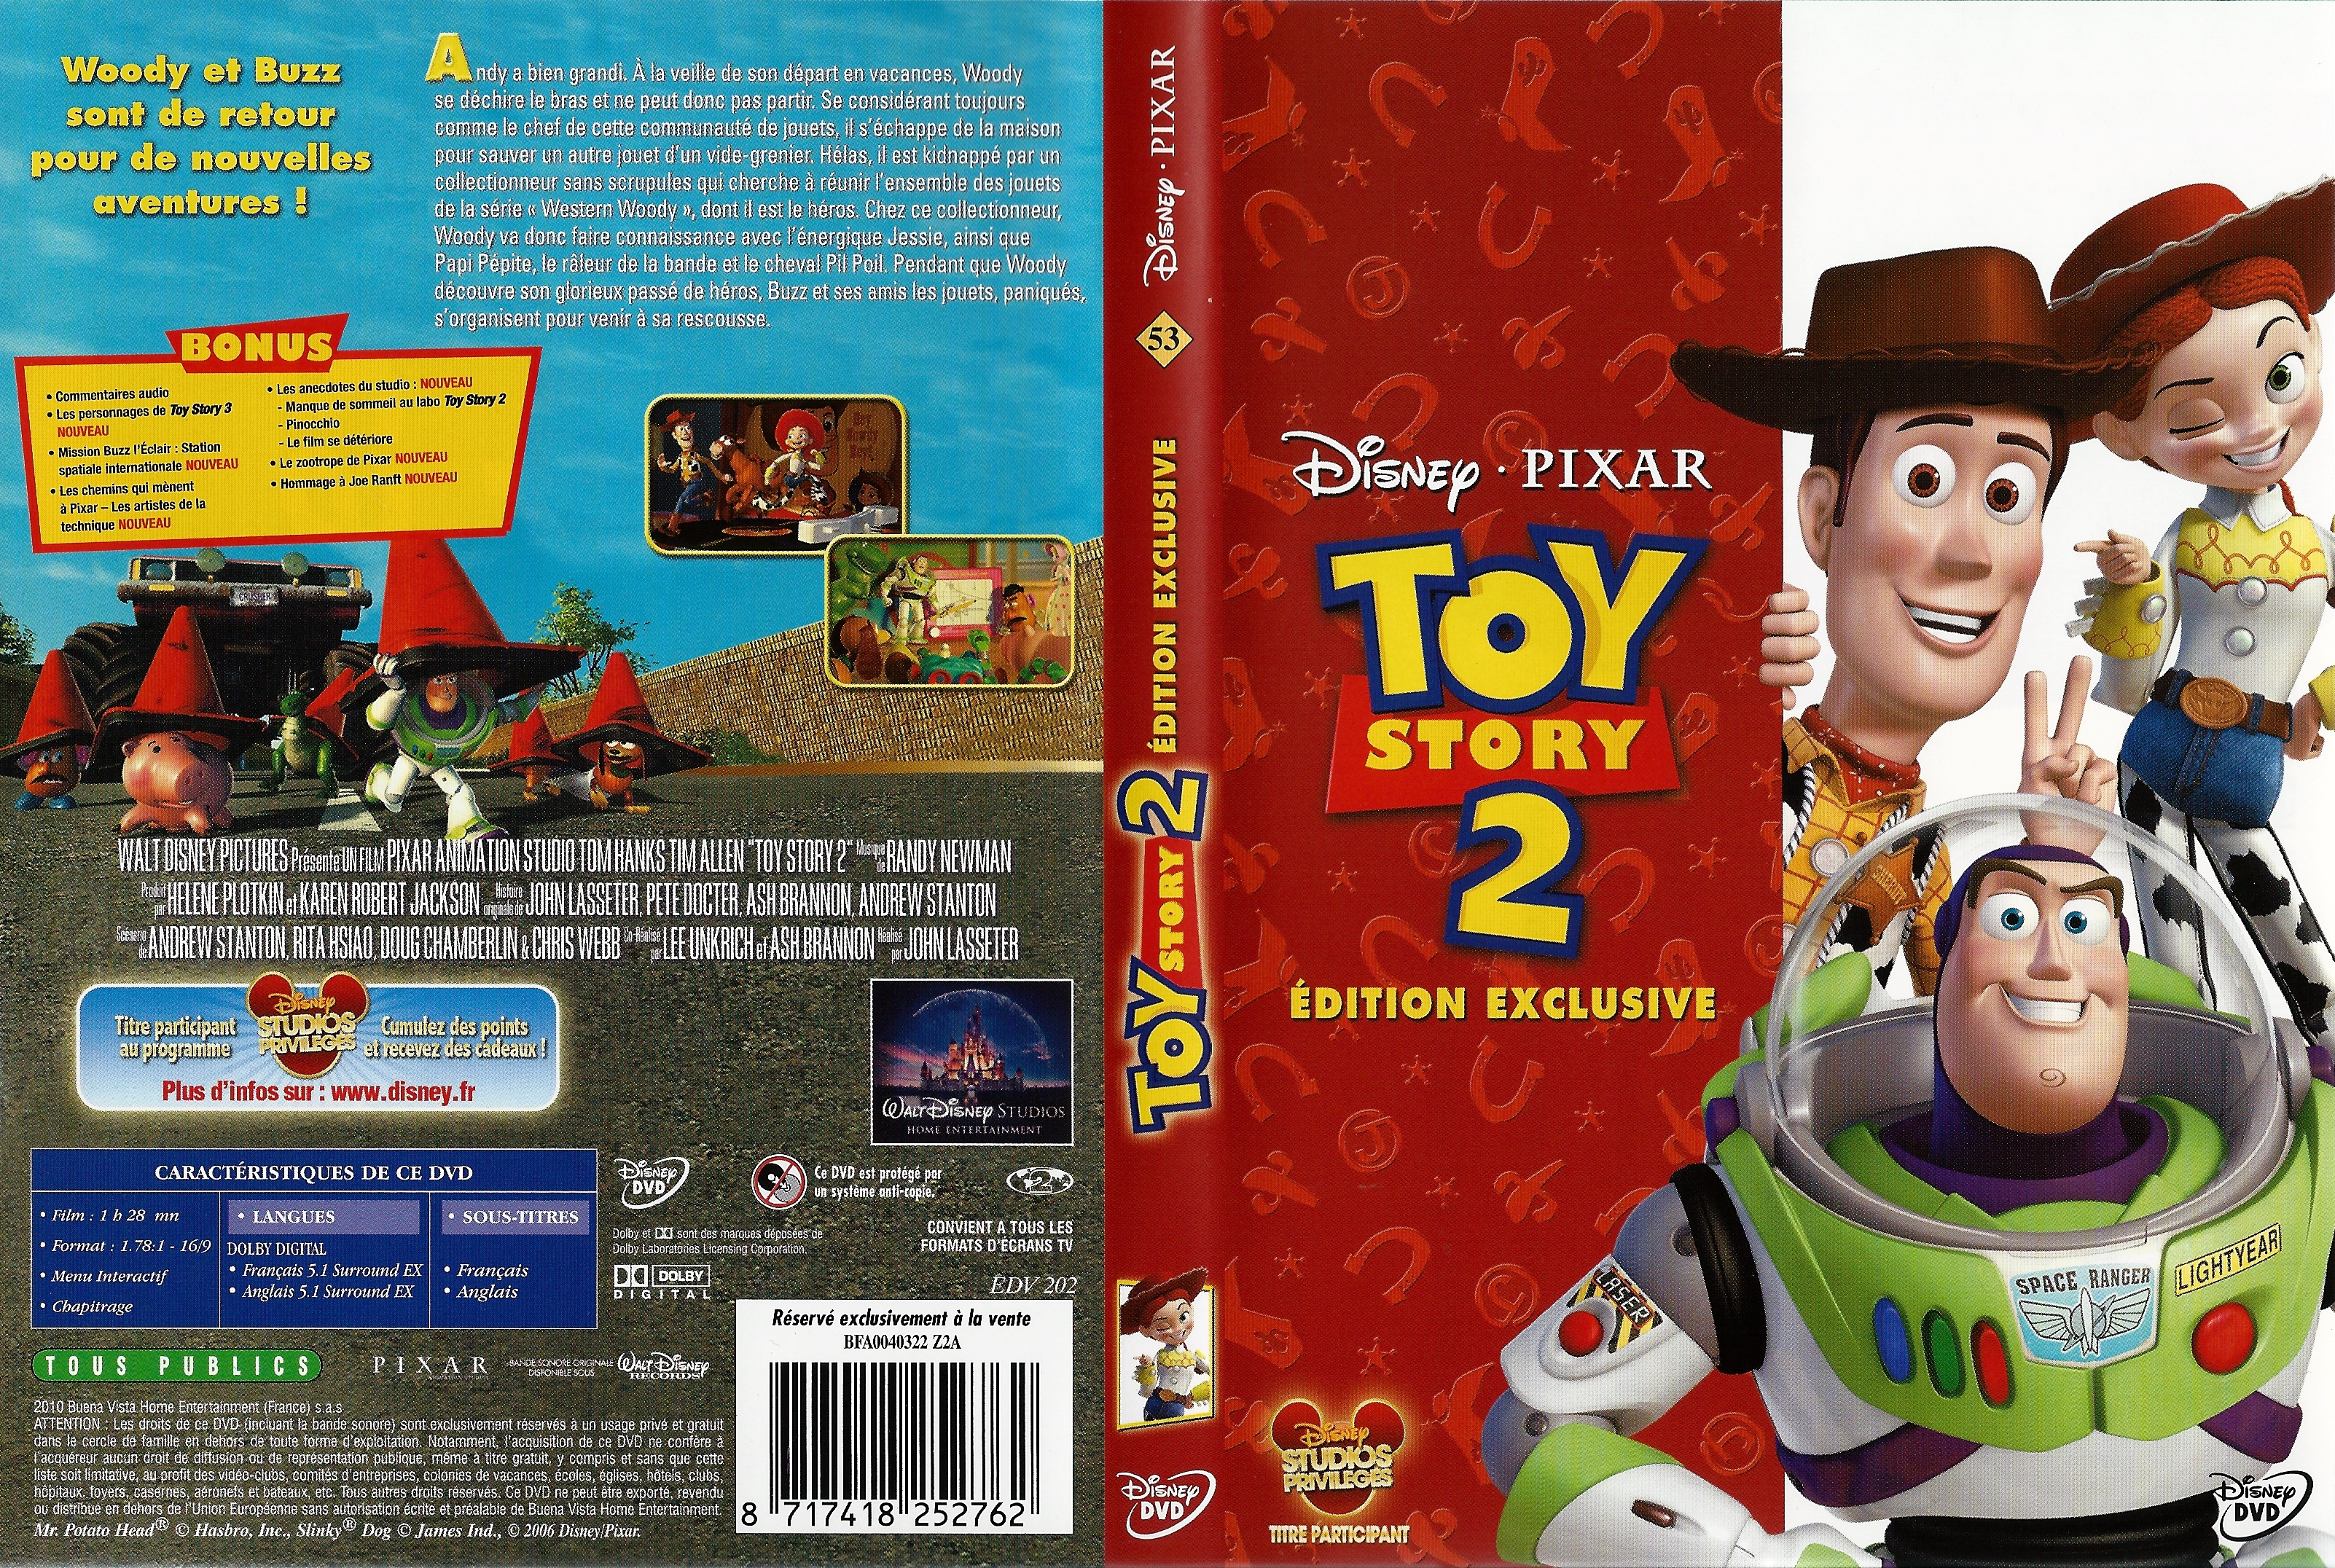 Jaquette DVD Toy Story 2 v3